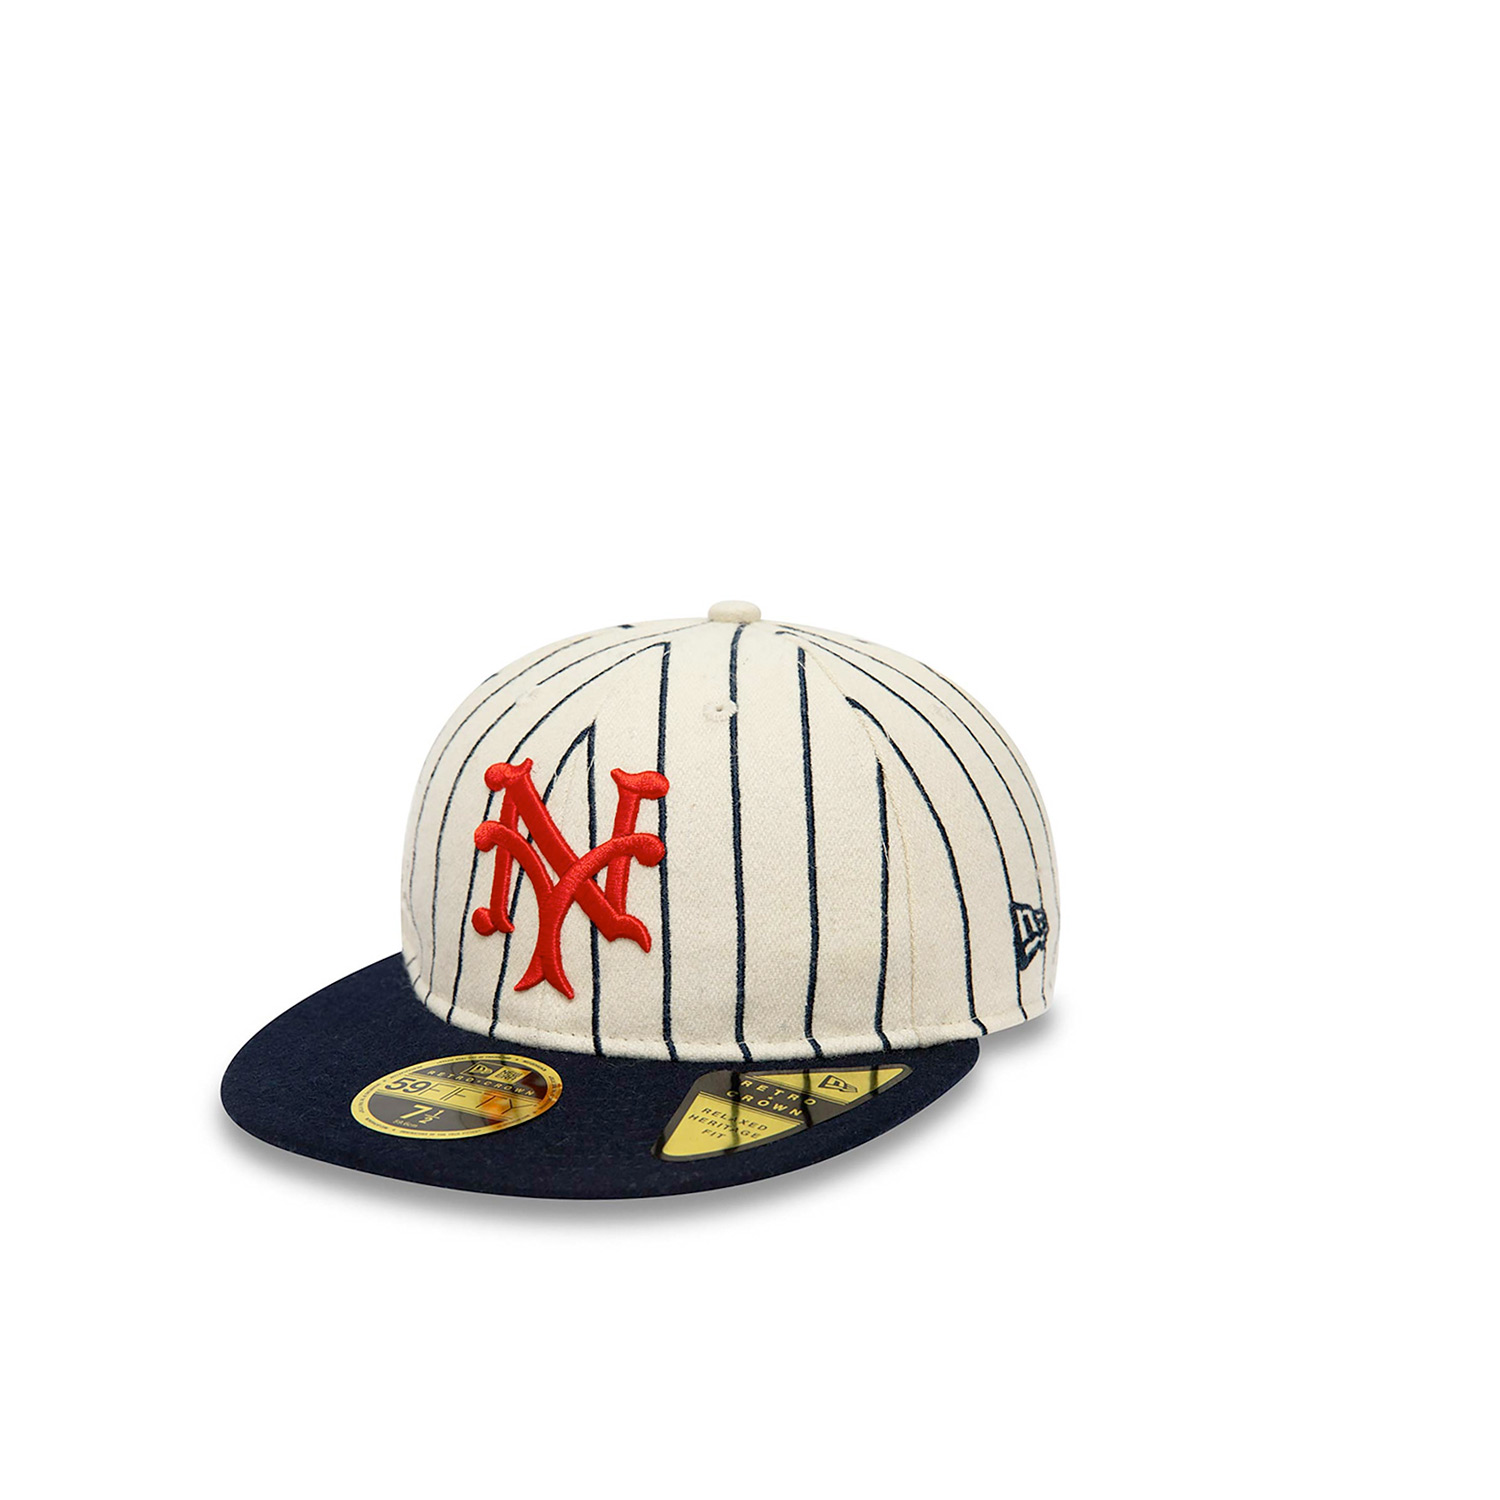 New era coops fty retro crown new york mets white